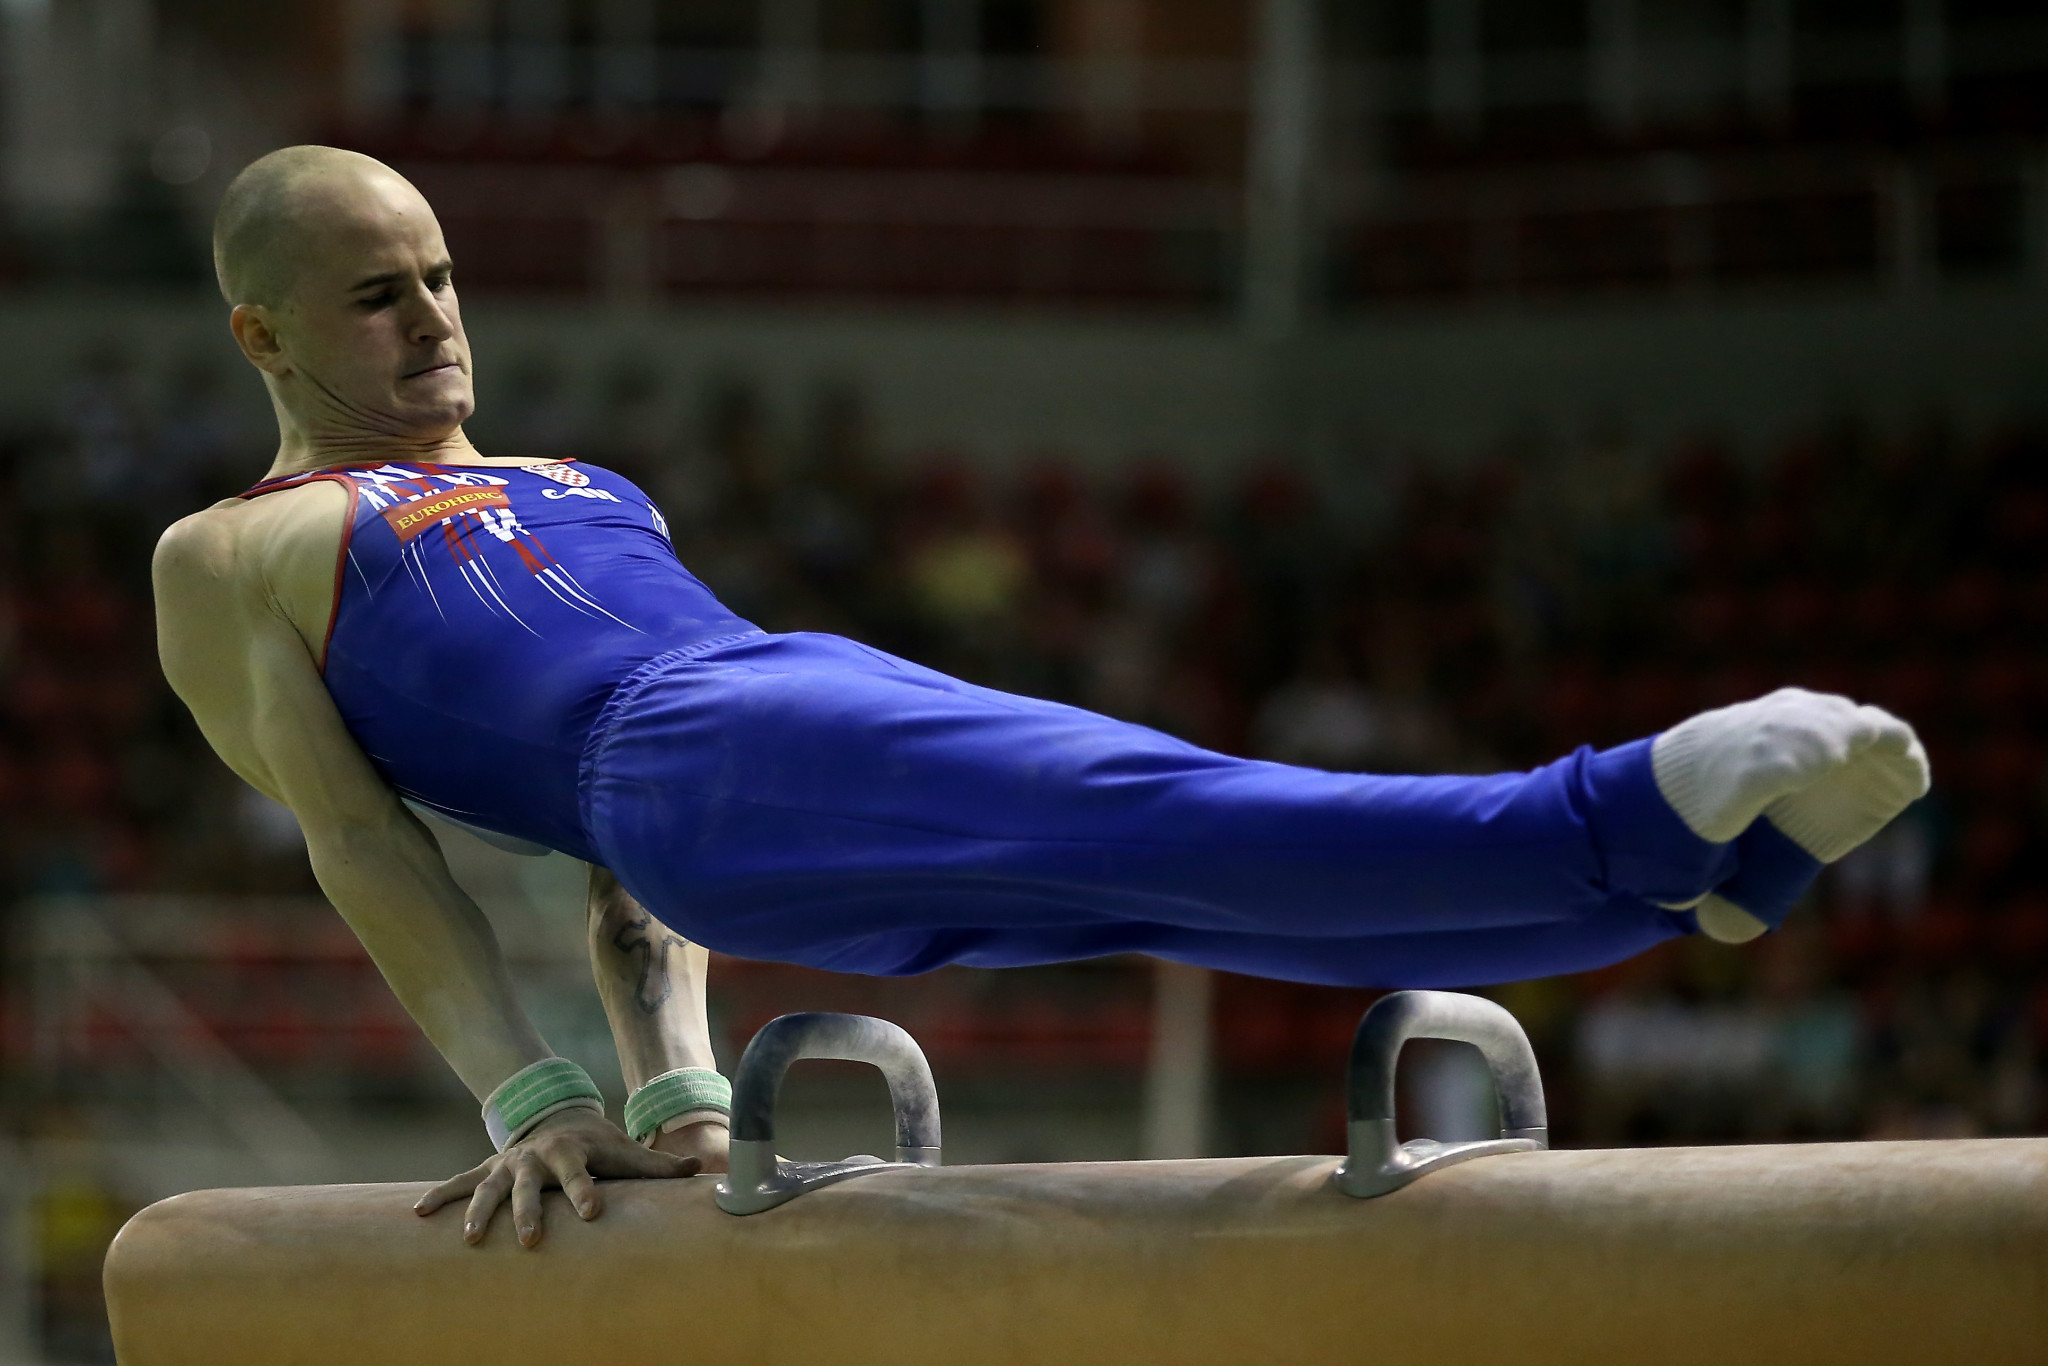 Beijing 2008 medallist Ude among winners at FIG Apparatus World Cup in Cottbus